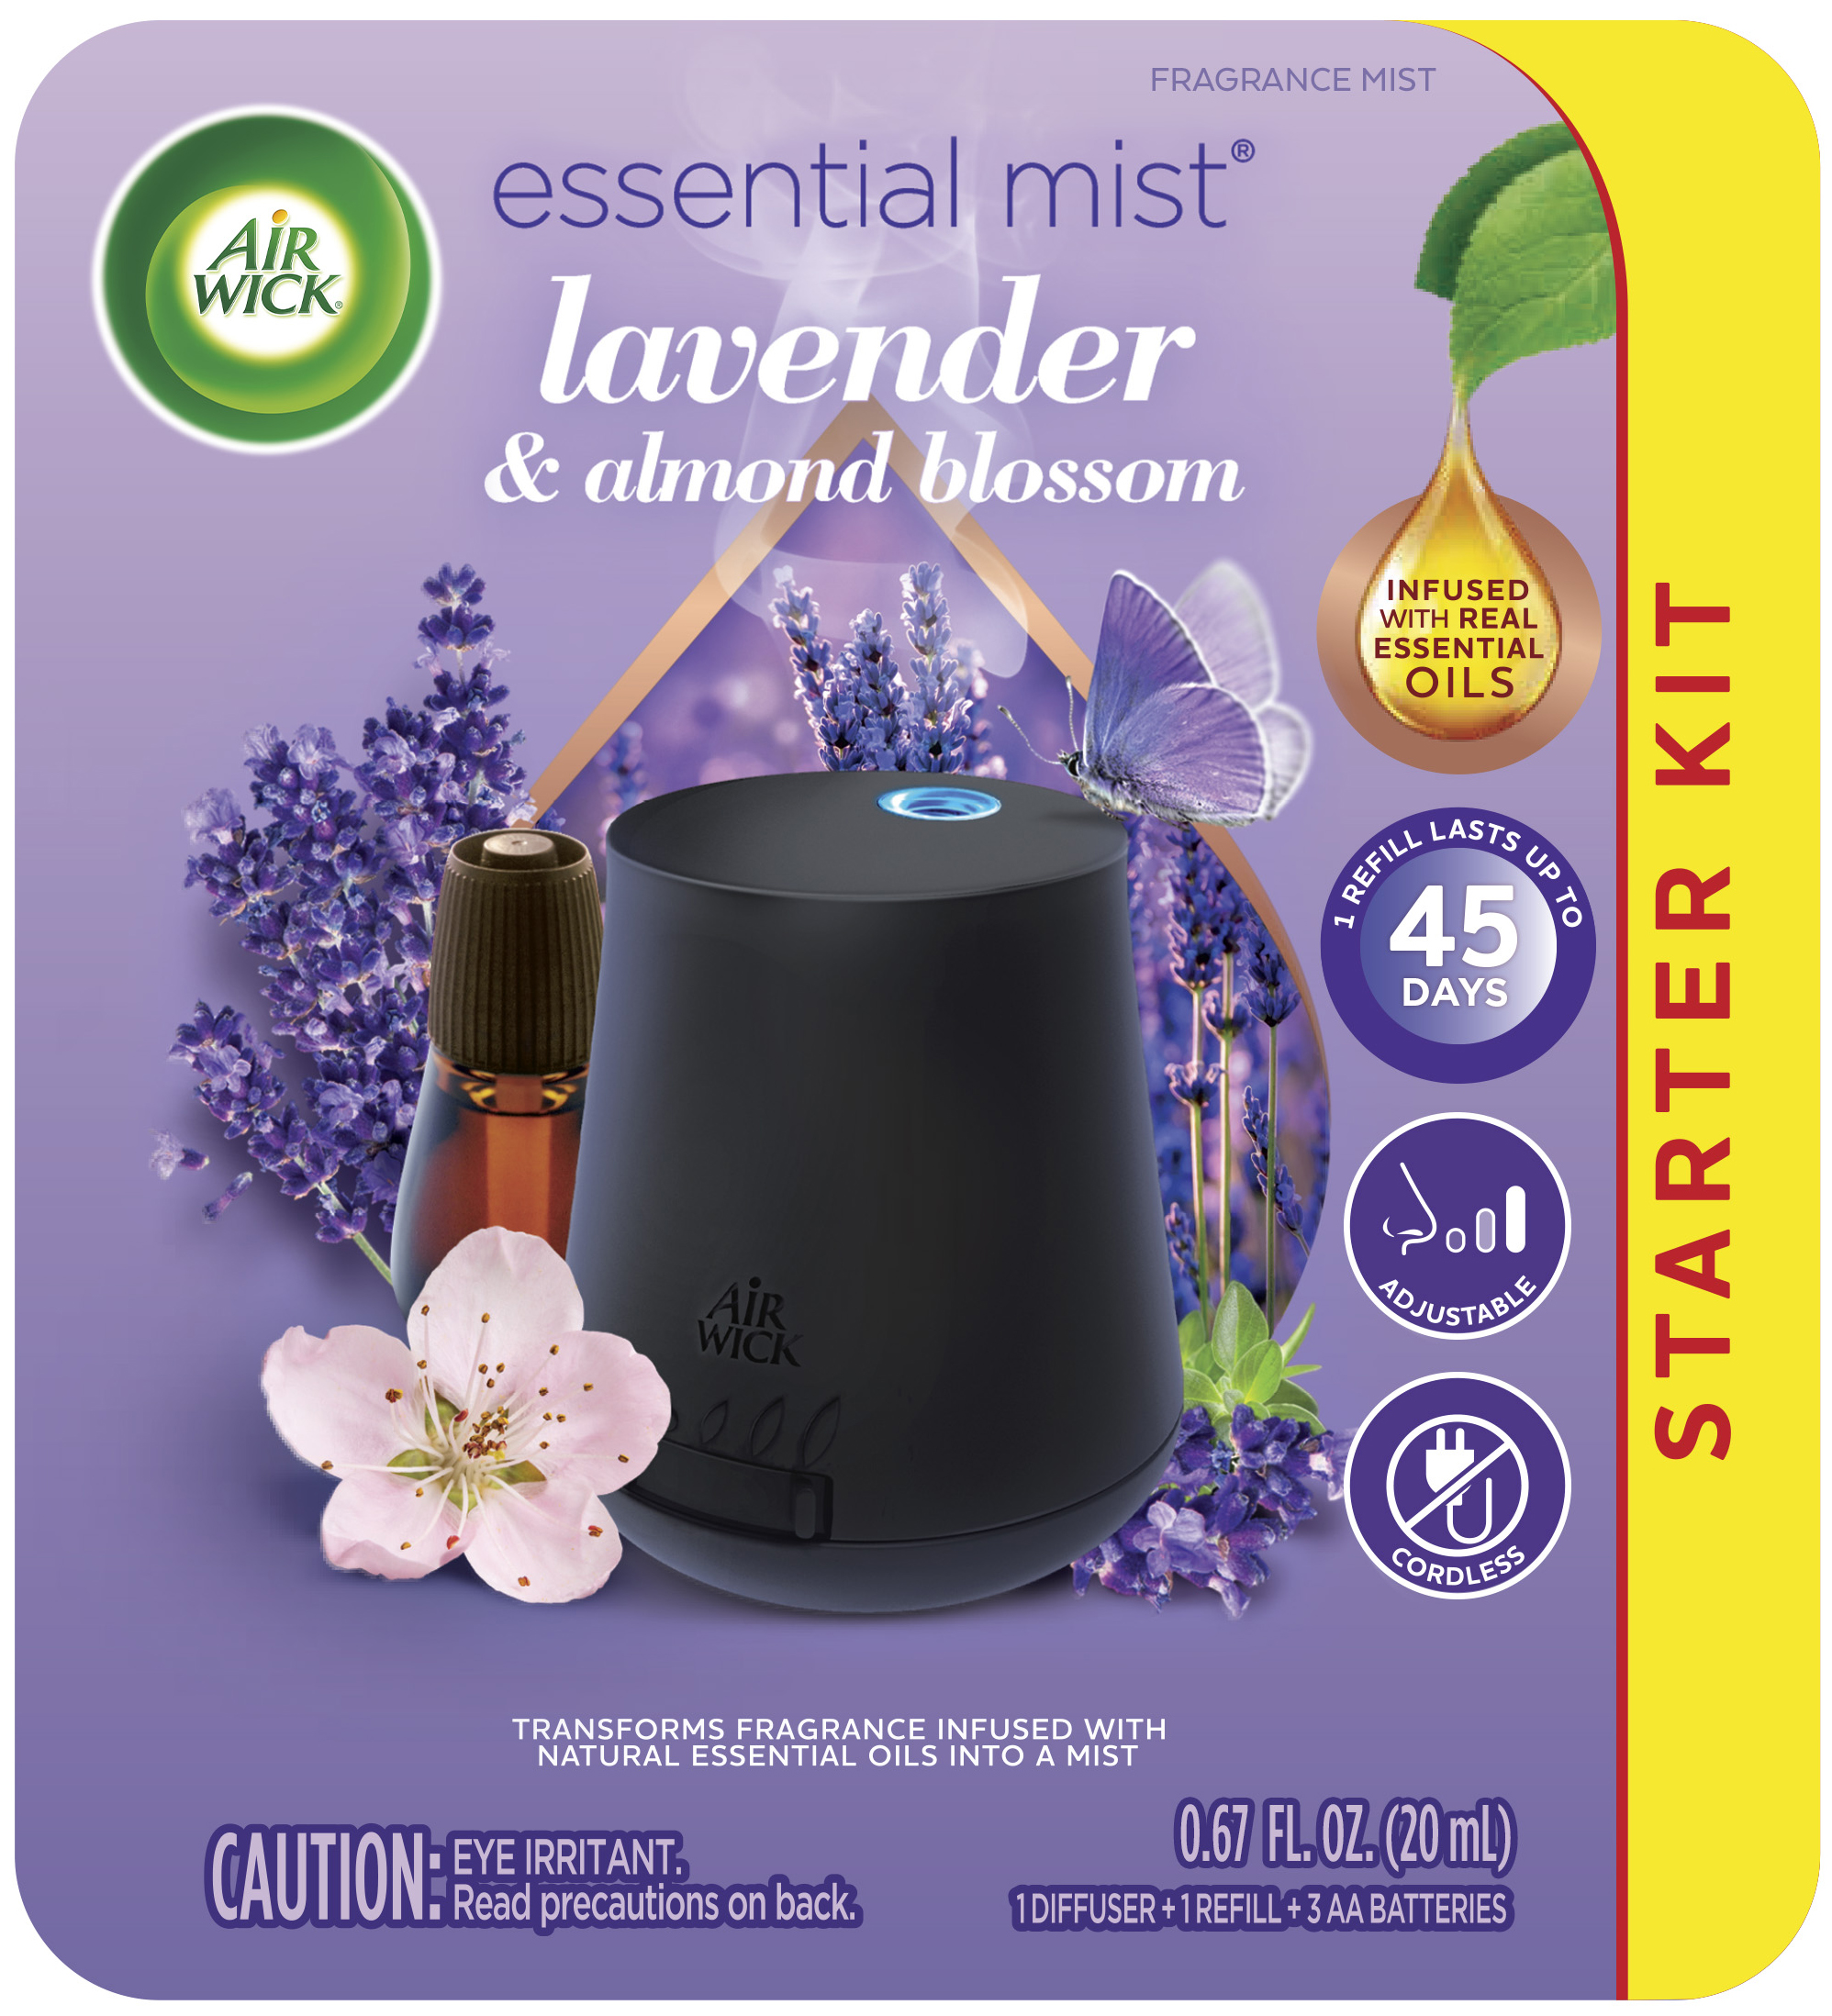 Air Wick Essential Mist Starter Kit (Diffuser + Refill), Lavender and Almond Blossom, Essential Oils Diffuser, Air Freshener - image 1 of 8